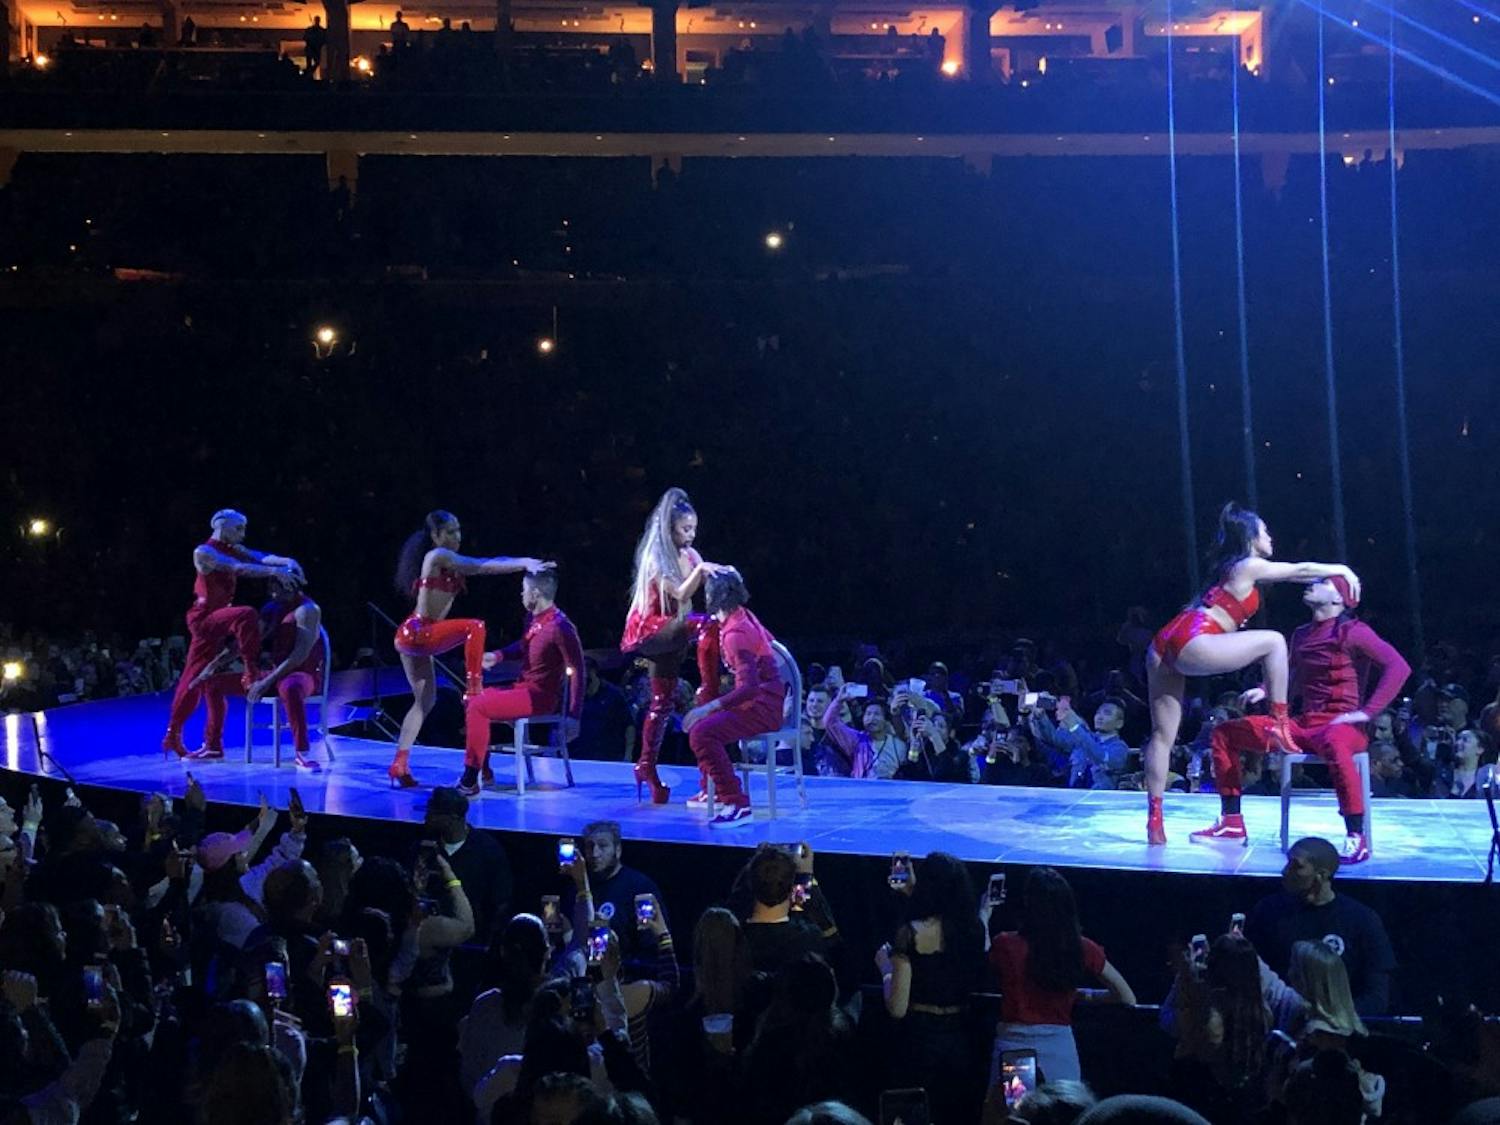 Pop star Ariana Grande shined at the KeyBank Center Friday night during the third stop of her "Sweetener World Tour."